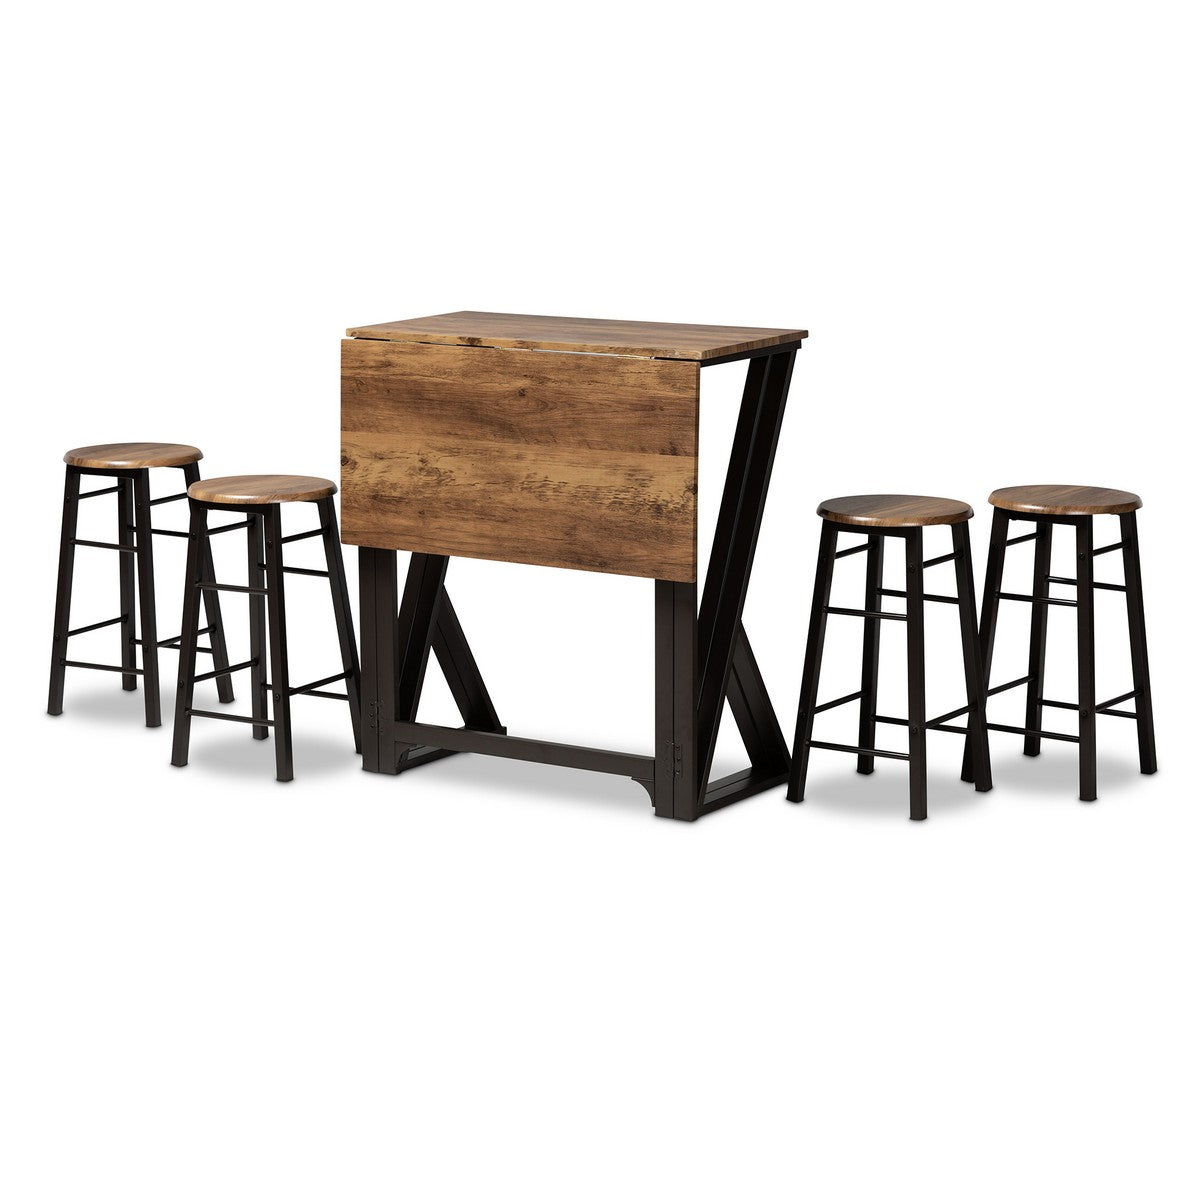 Baxton Studio Richard Industrial and Rustic Walnut Finished Wood and Black Metal 5-Piece Pub Set with Extendable Tabletop Baxton Studio-Pub Sets-Minimal And Modern - 1